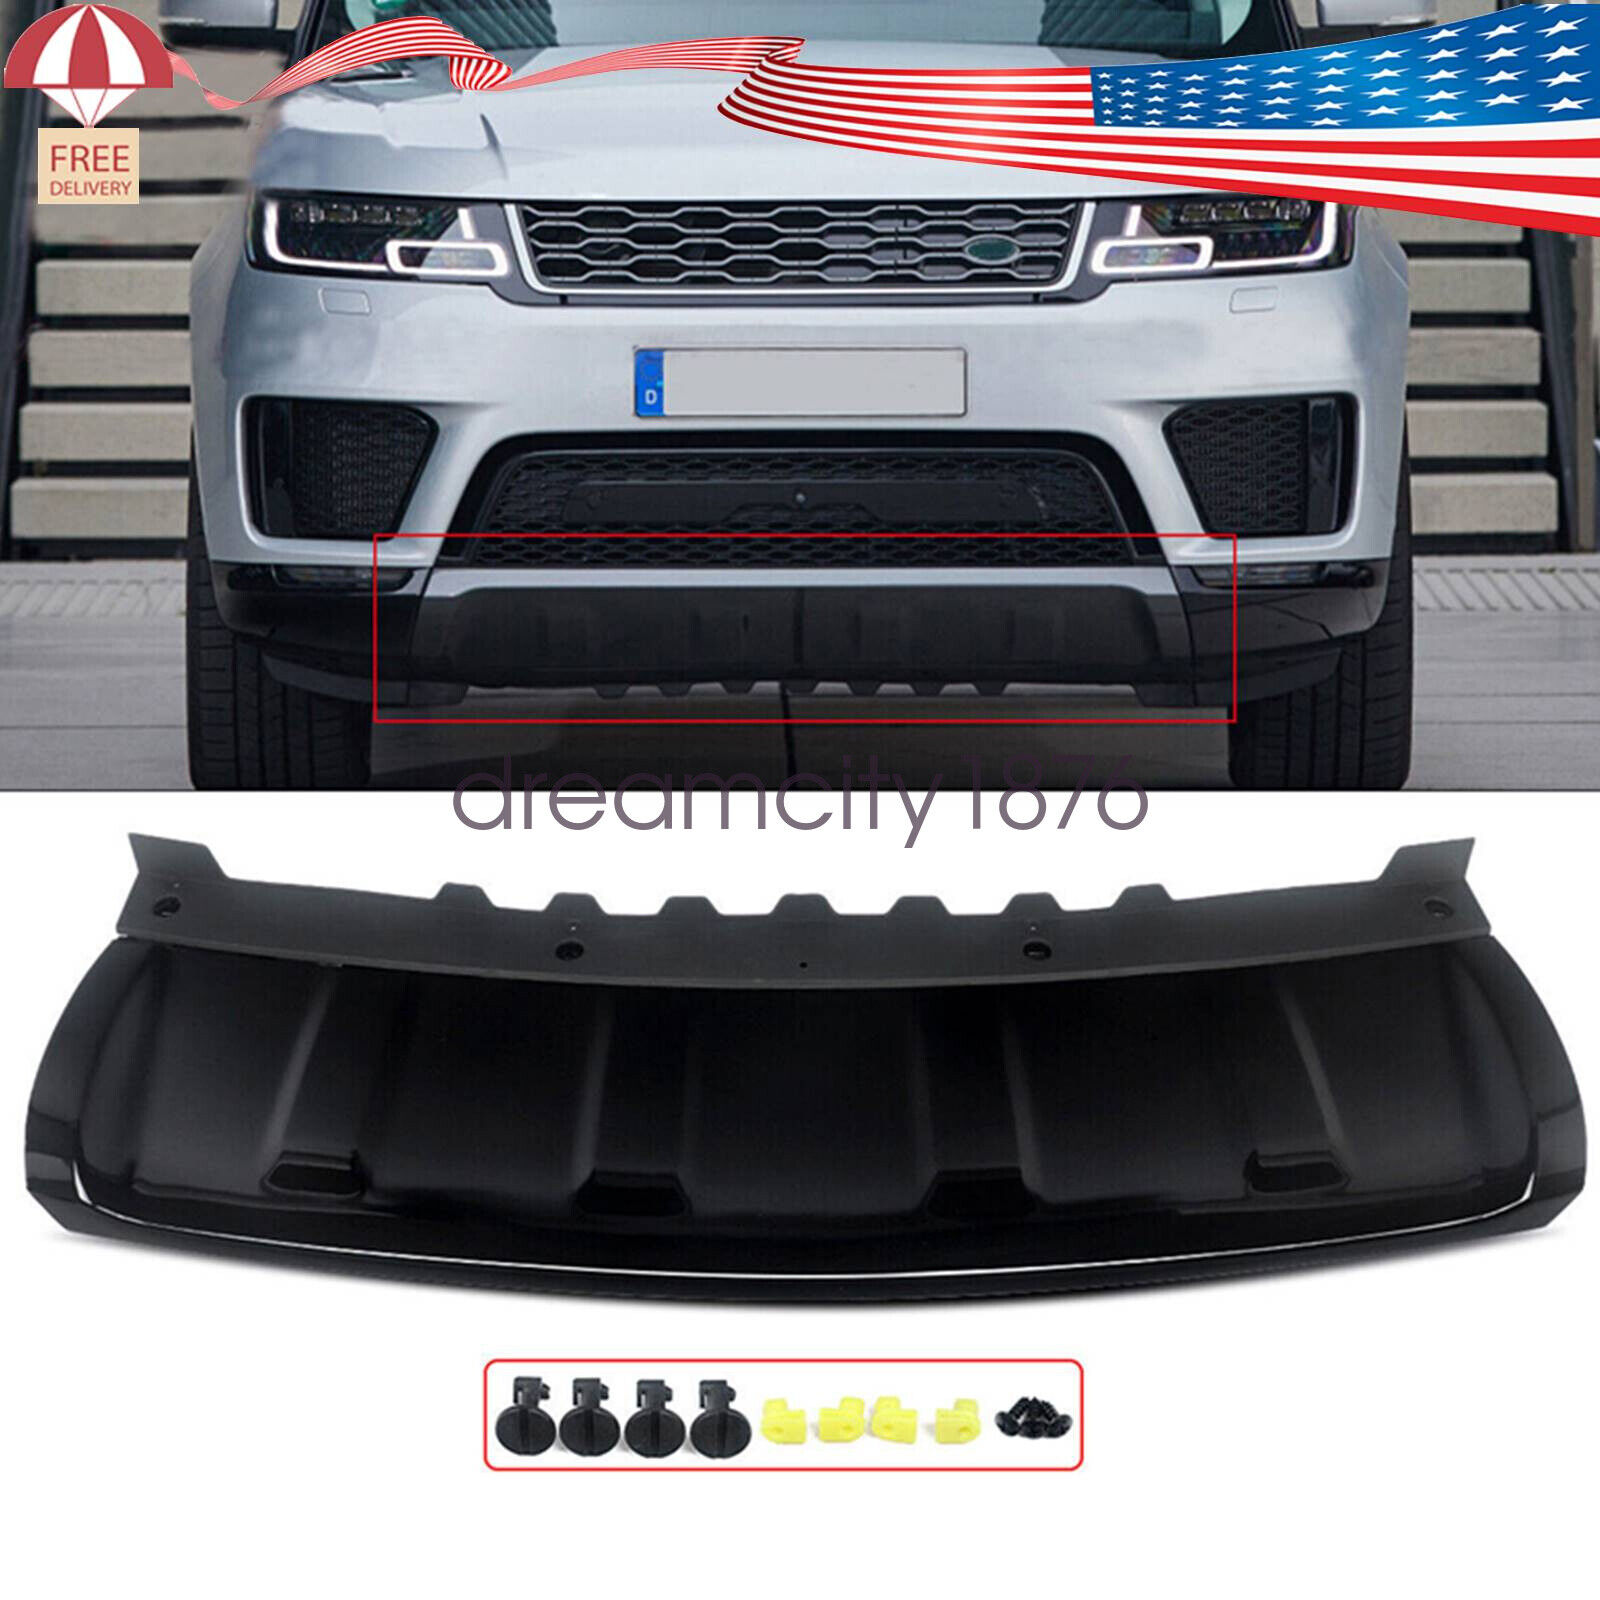 Fit For Range Rover Sport 2018-2021 Black Front Bumper Lower Guard Plate Cover